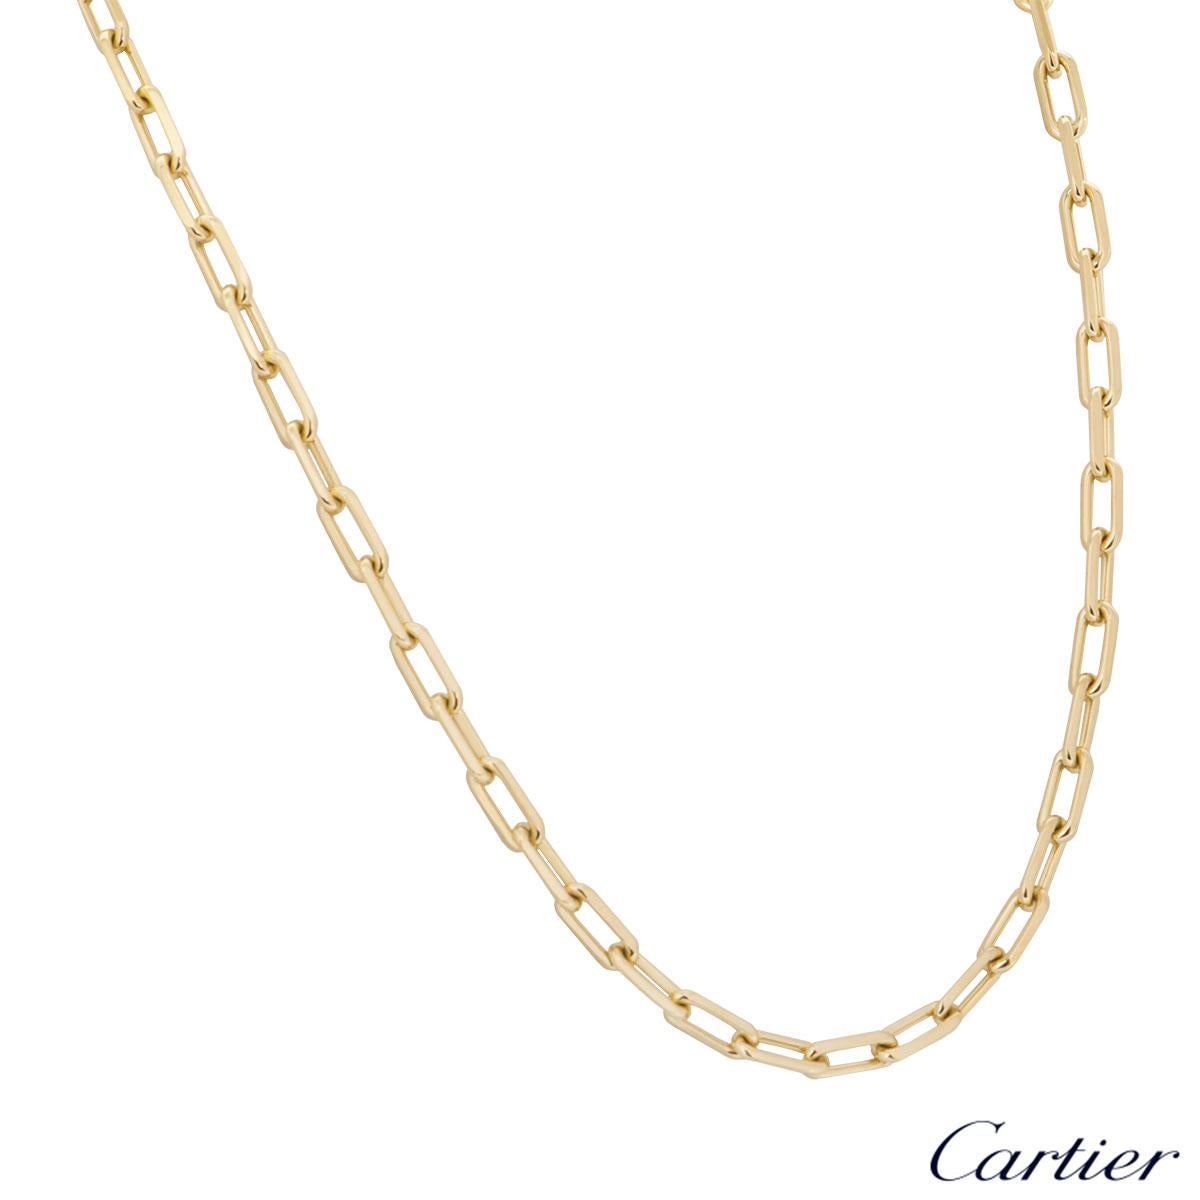 An 18k yellow gold necklace by Cartier from the Santos De Cartier collection. The necklace features an elongated cable chain set with a lobster clasp. The necklace has a length of 22.00 inches and has a gross weight of 55.20 grams. 

The necklace